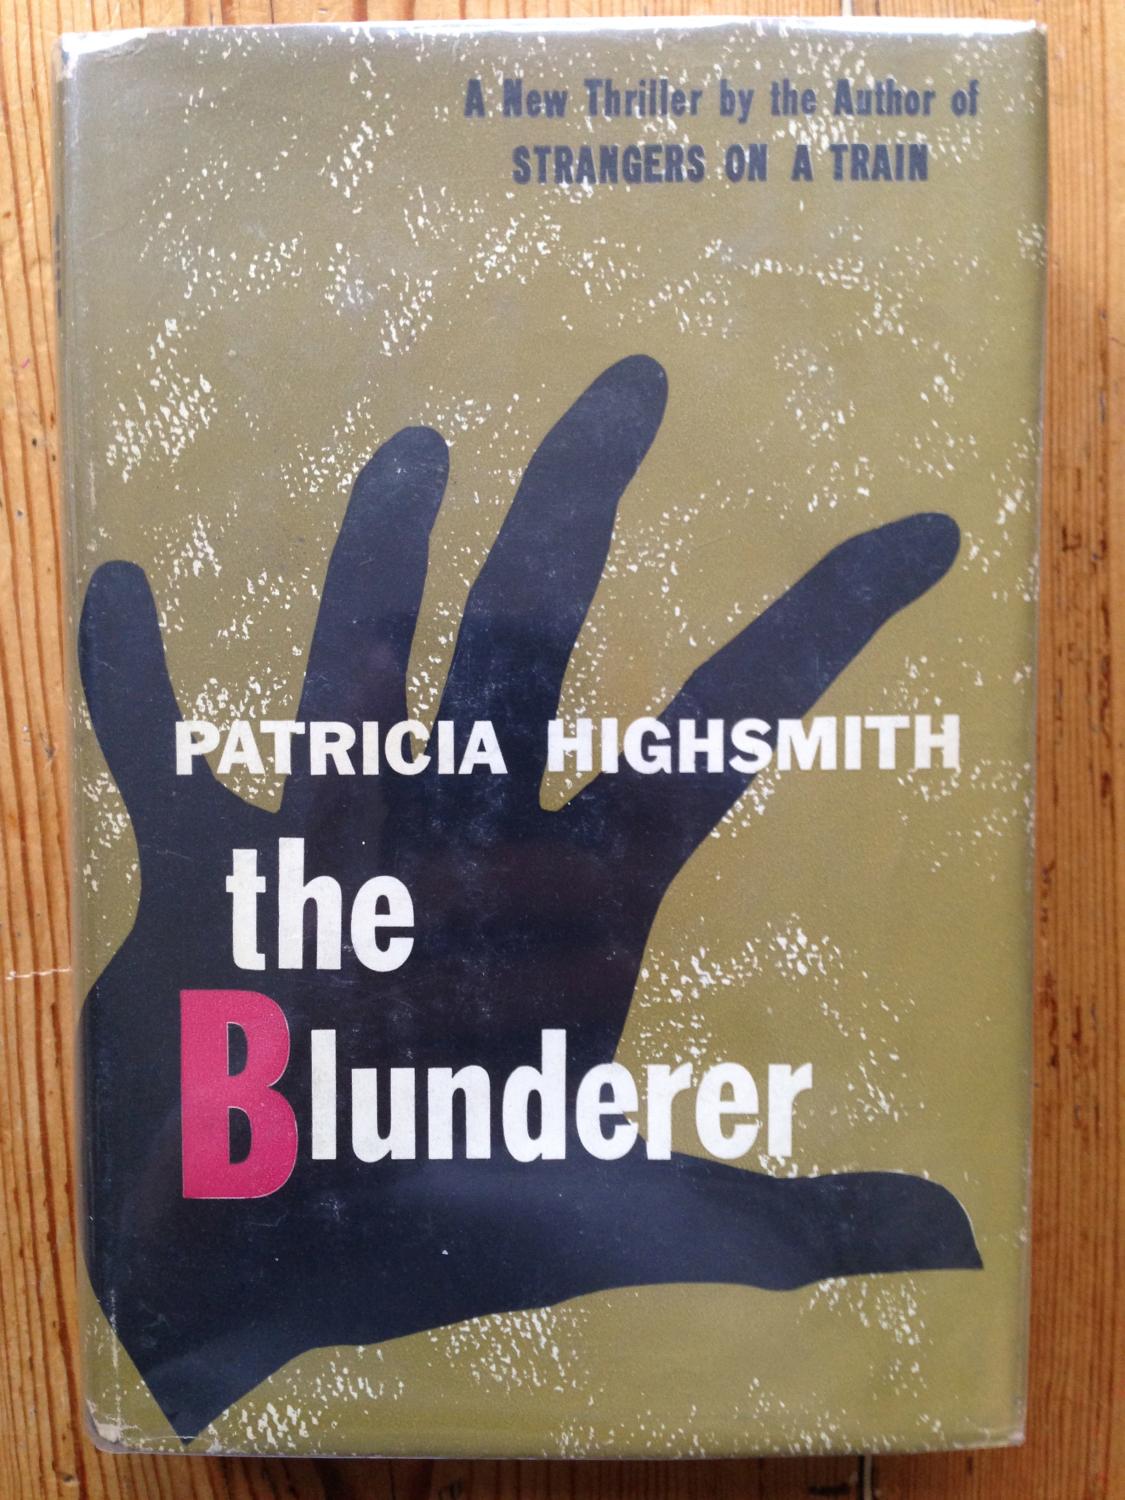 The Blunderer cover.